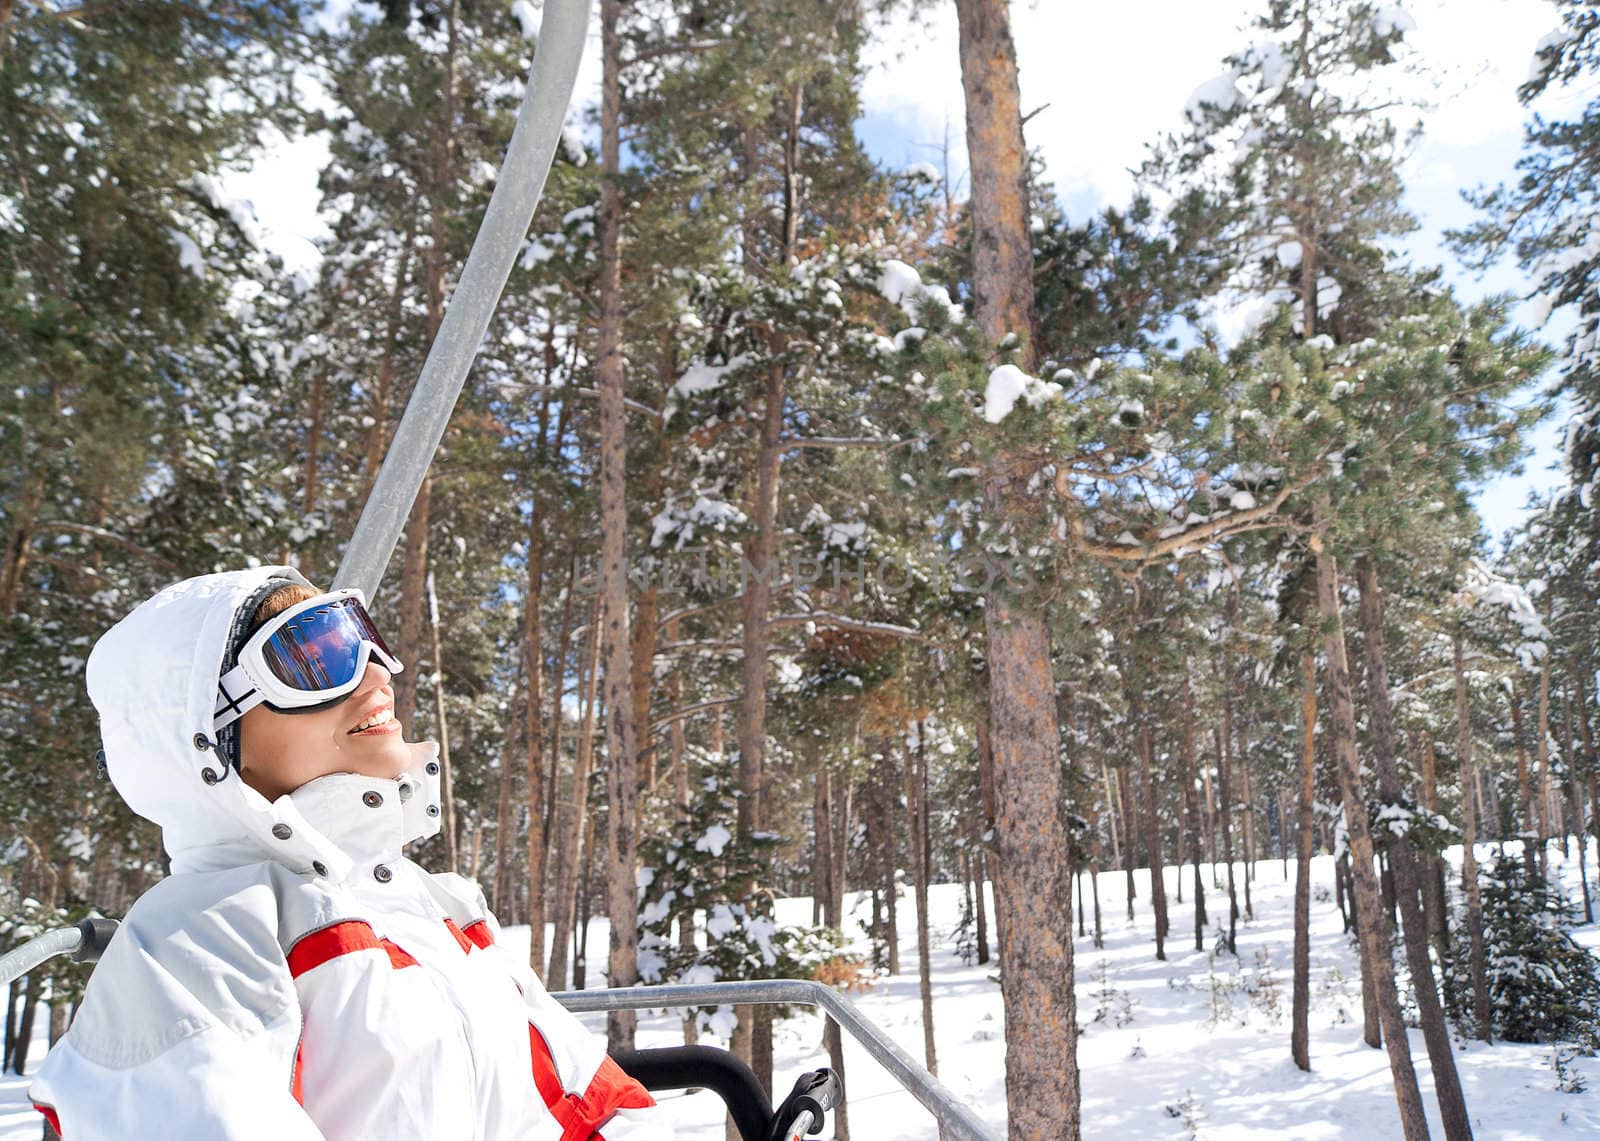 Skier going on chairlift in forest. Sarikamis. Turkey by Denovyi